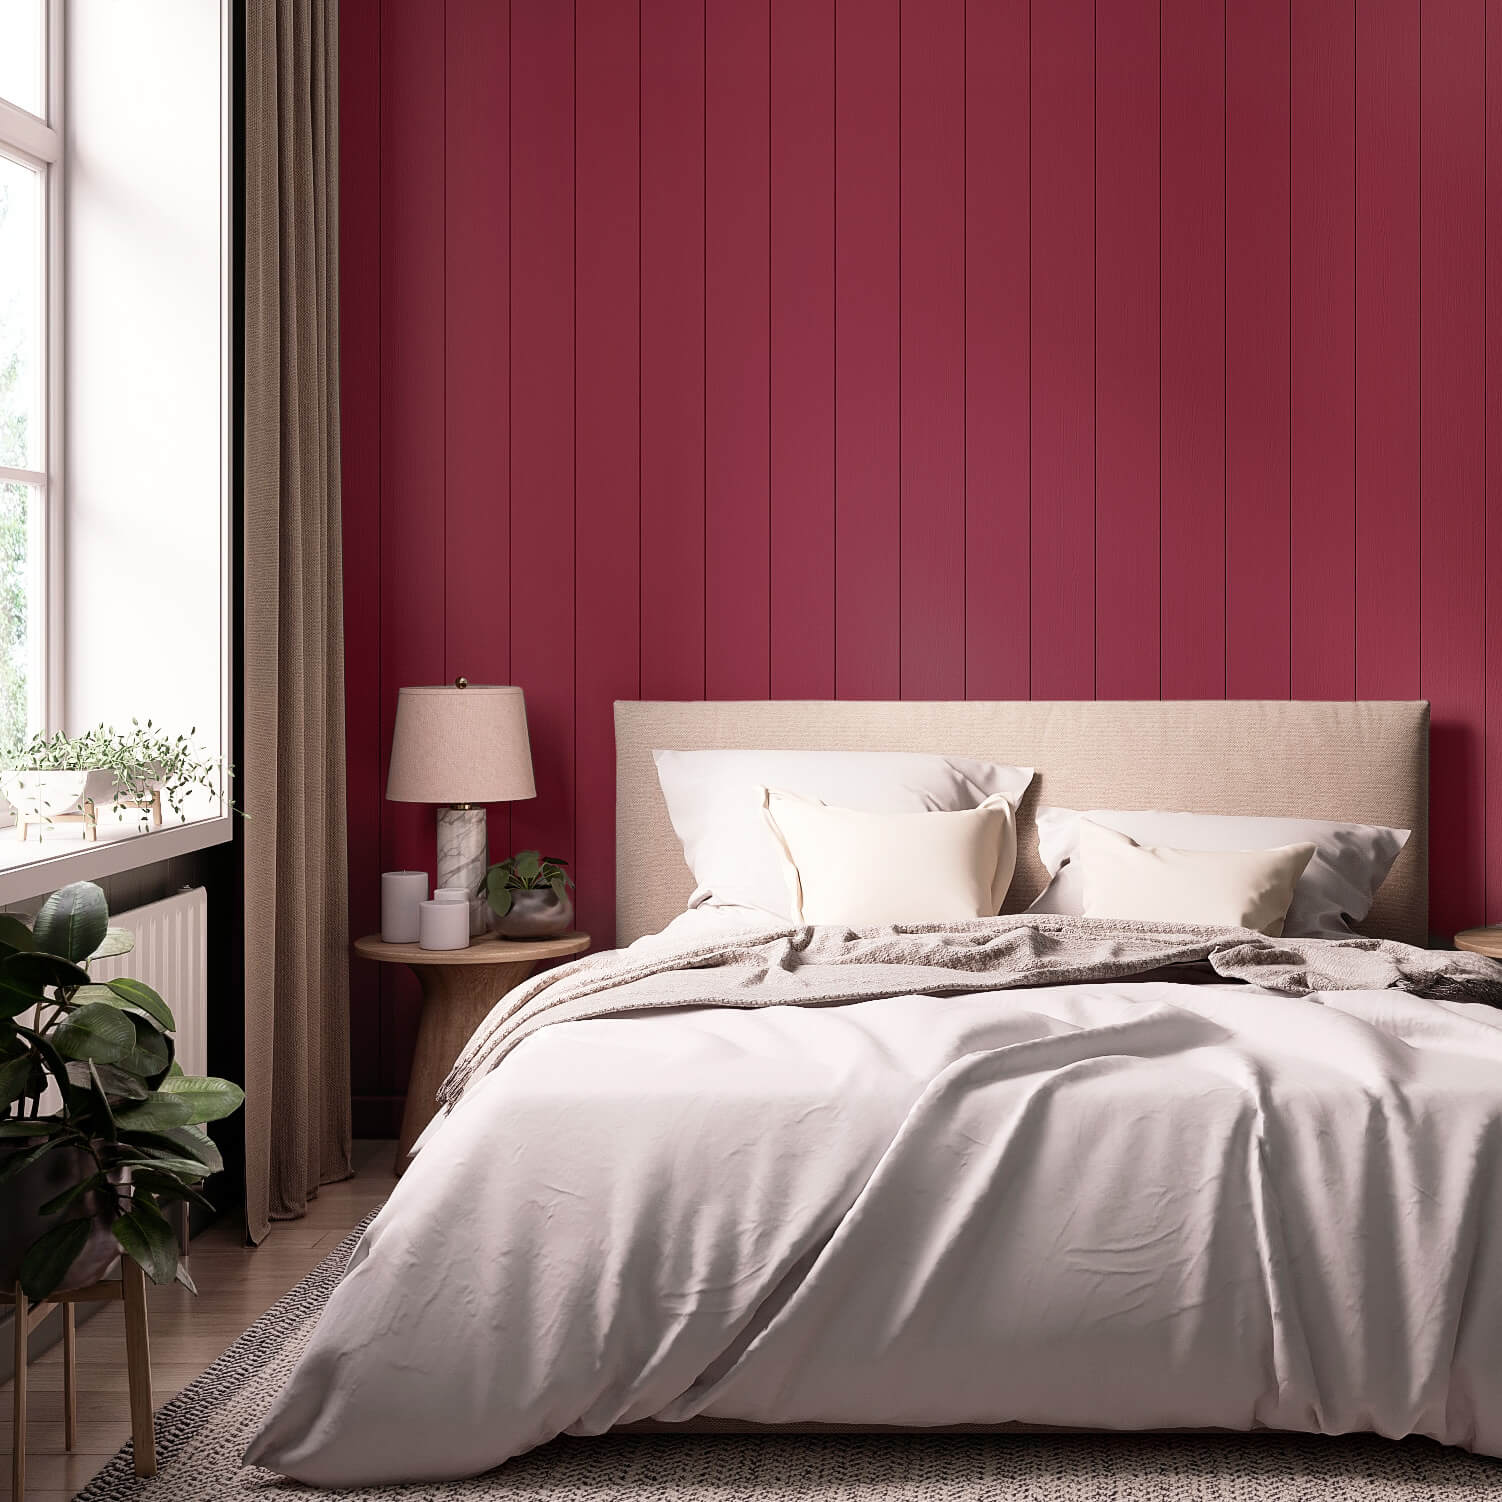 MissPompadour Pink with Peony - The Valuable Wall Paint 1L